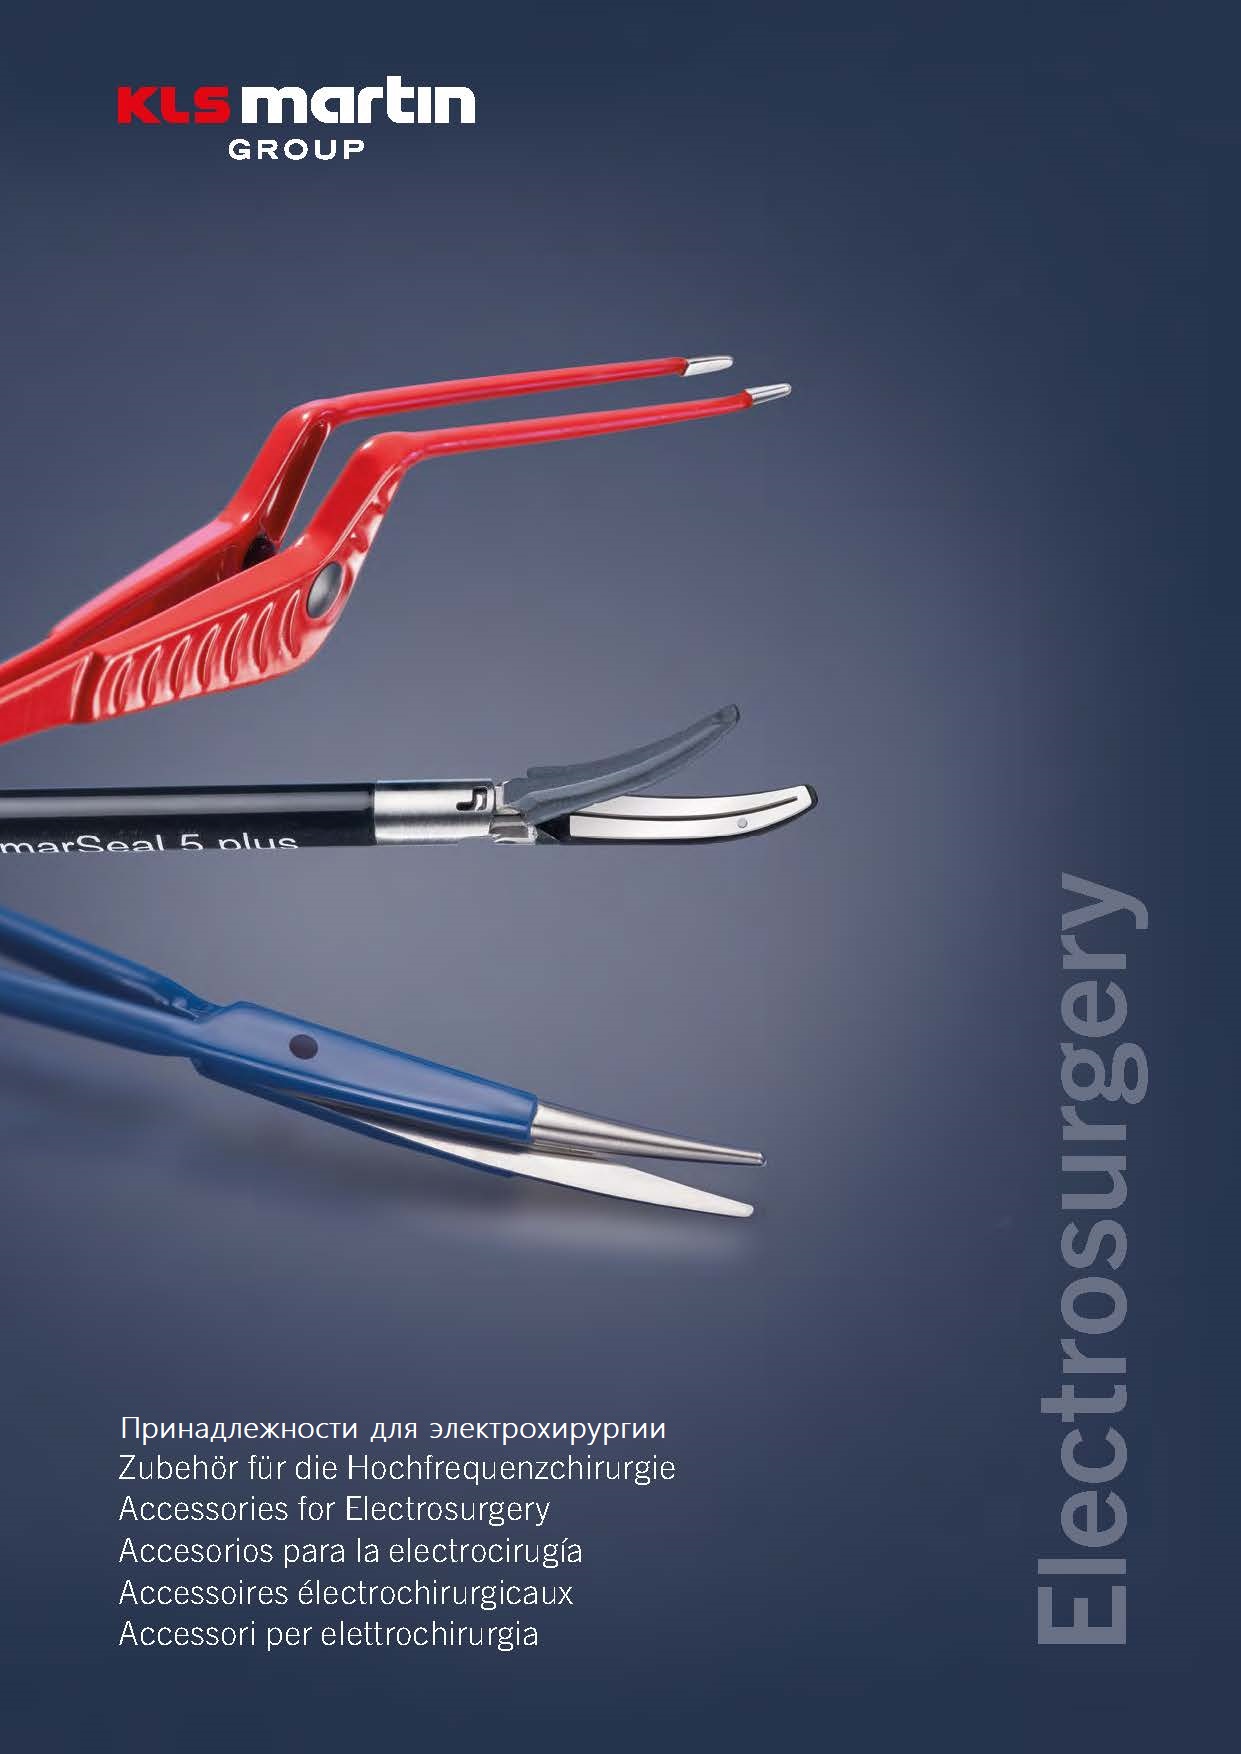 Title 90 302 48 10 Accessories for electrosurgery catalog